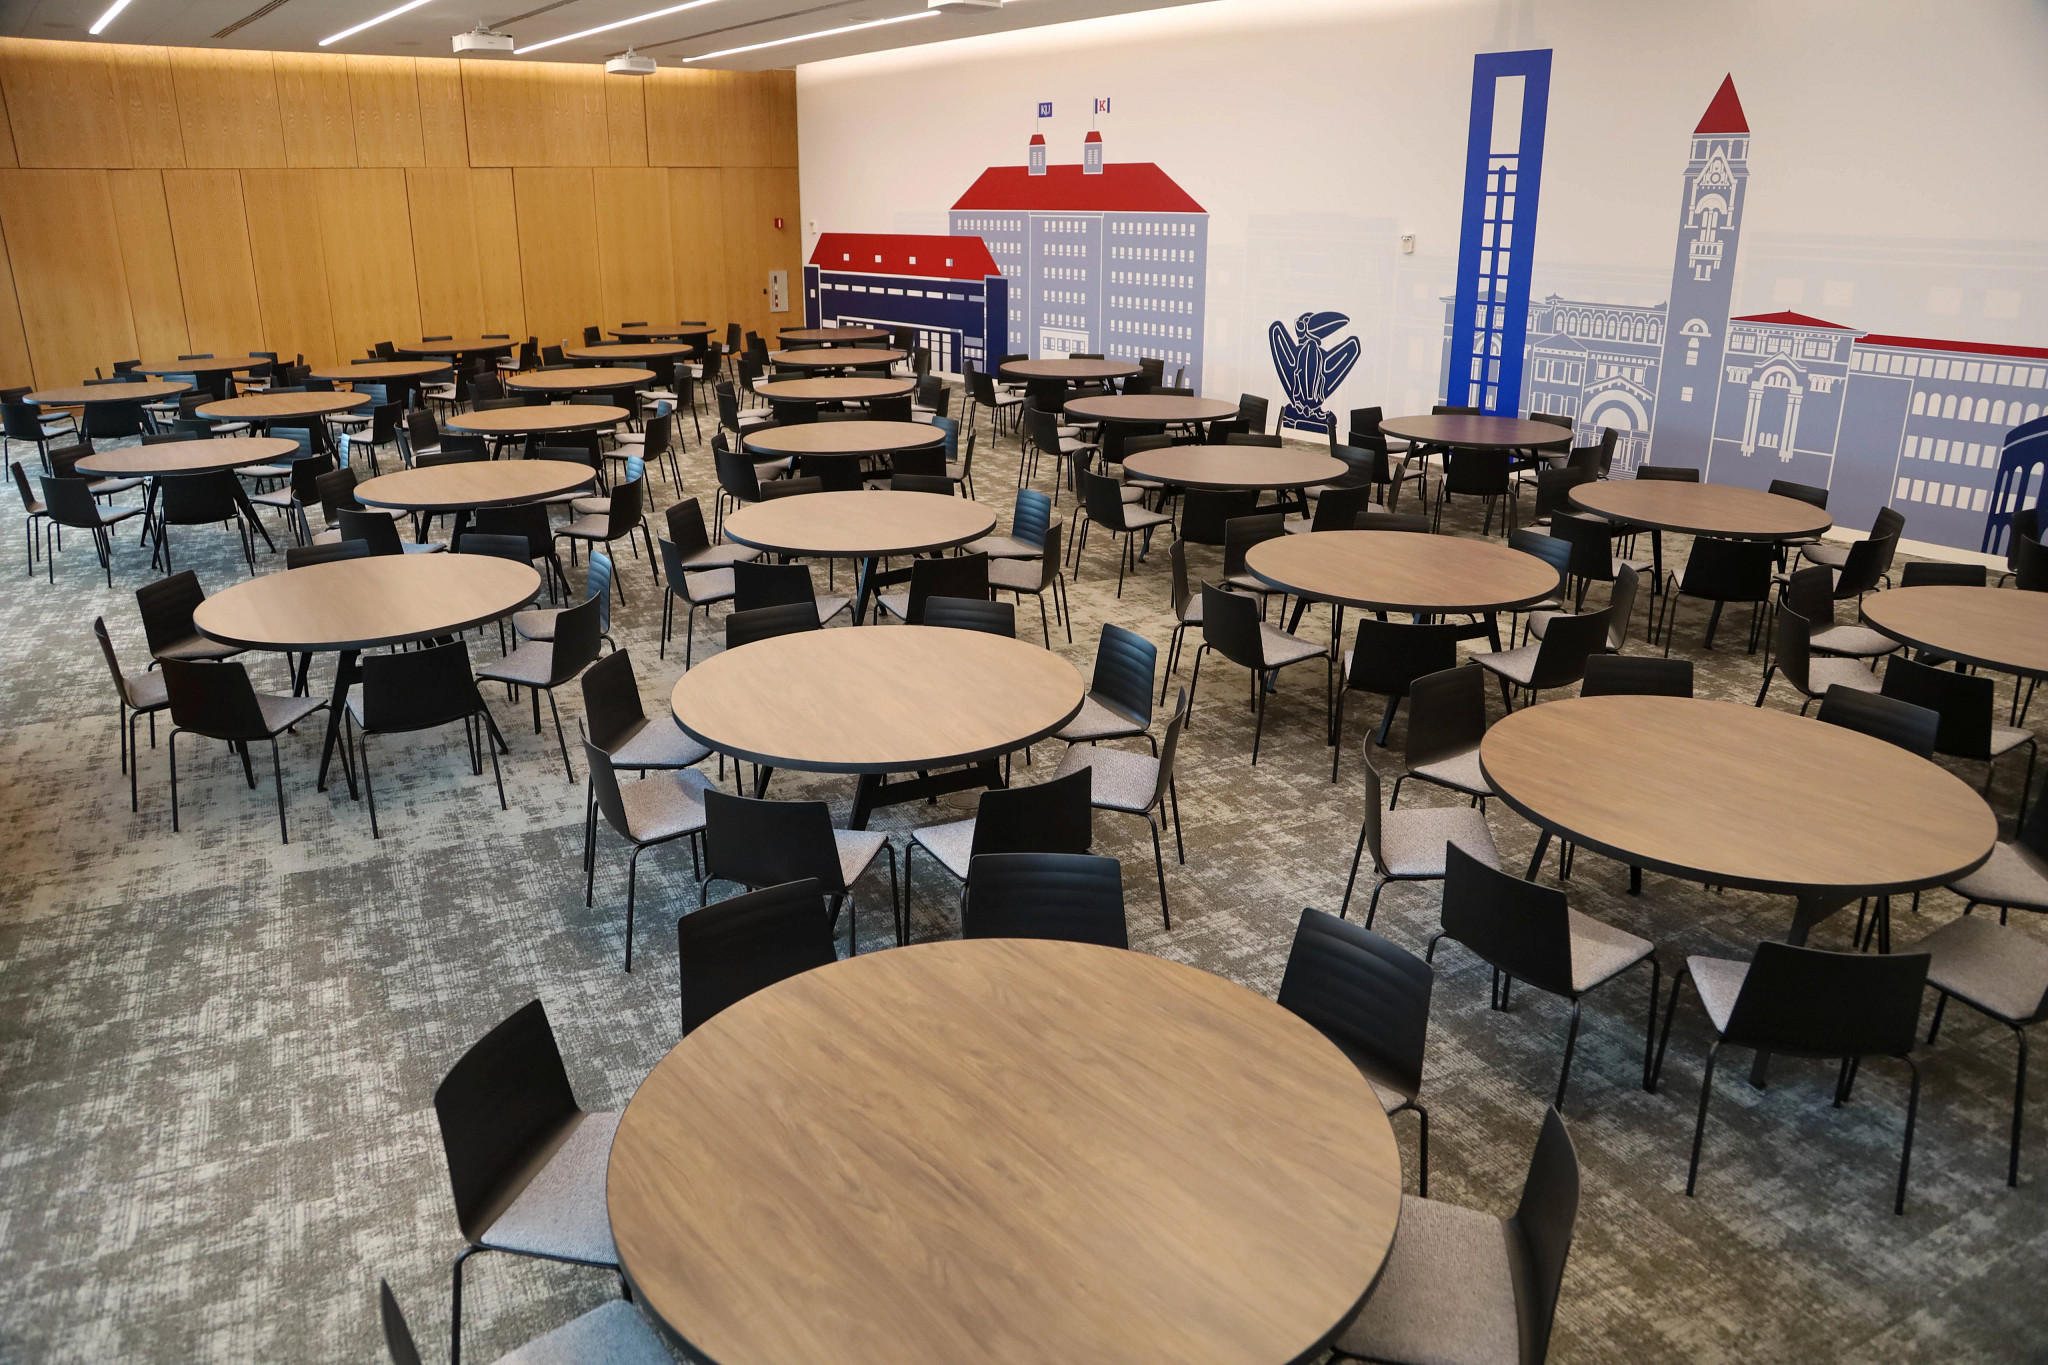 Rows of round table surrounded by chairs, with a KU campus mural on the wall.